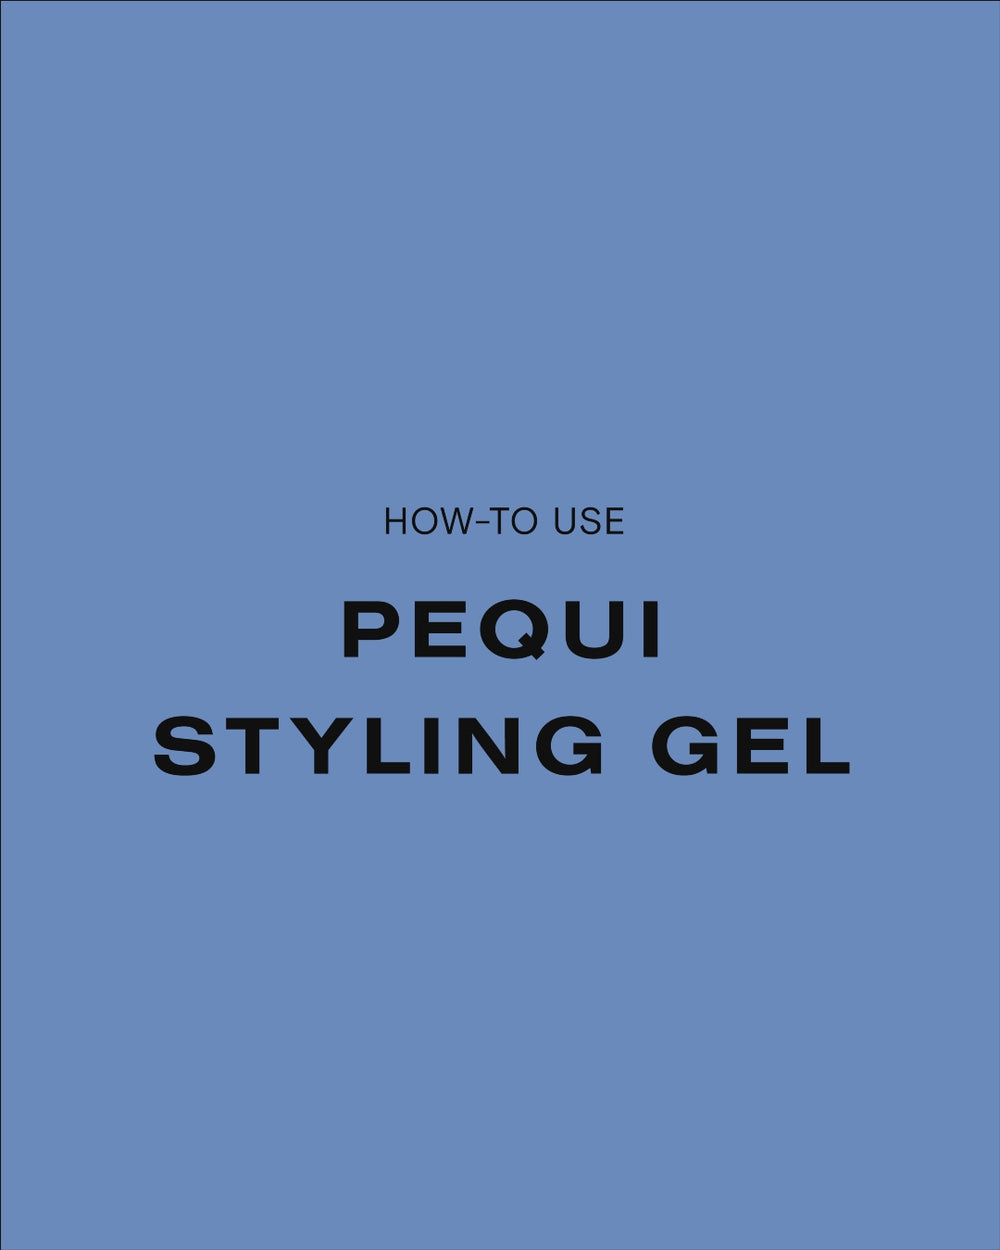 Ceremonia's Pequi Styling Gel Is a Must-Have for Curly Hair Types